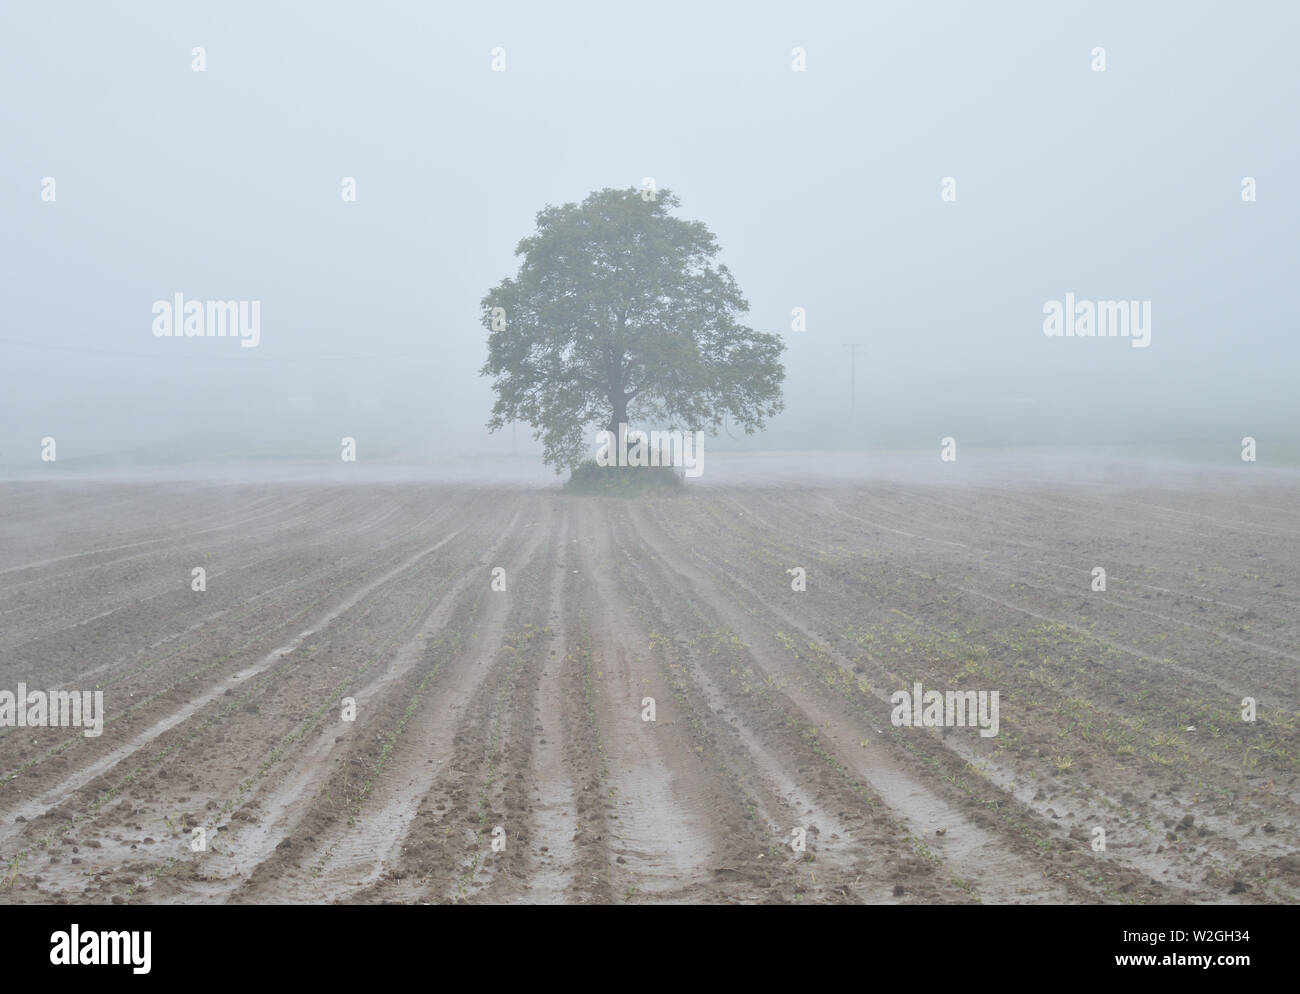 Lonely tree in ploughed field, misty landscape Stock Photo